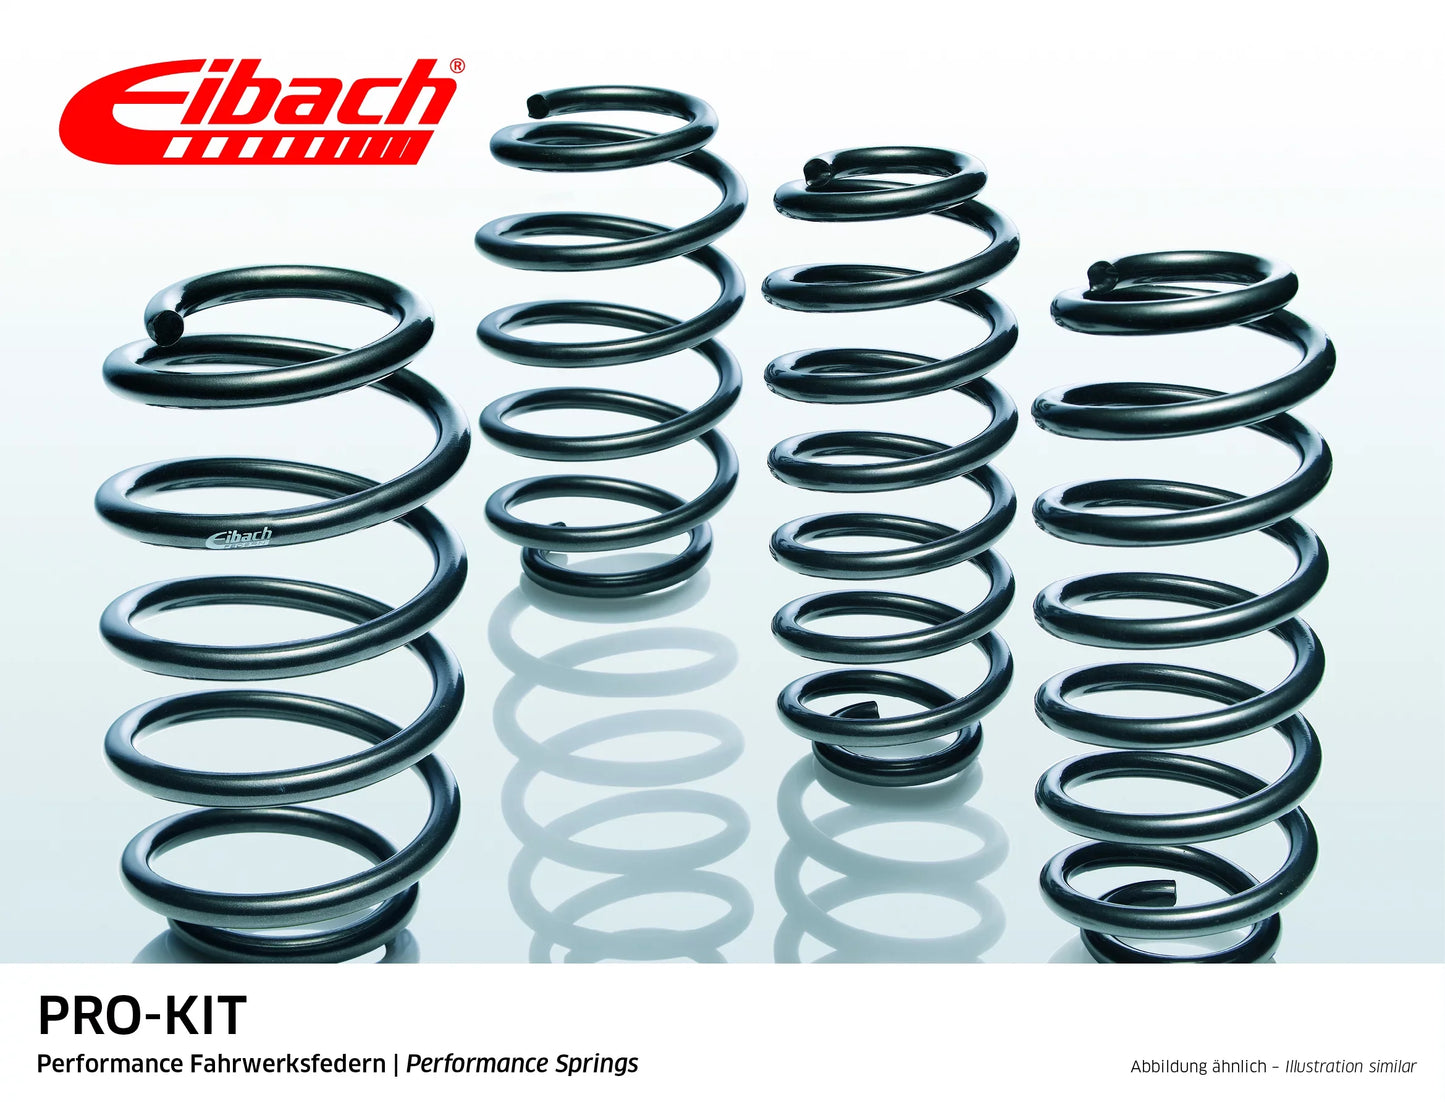 Eibach Pro-Kit Lowering Springs (E10-30-012-01-22) at £251.74